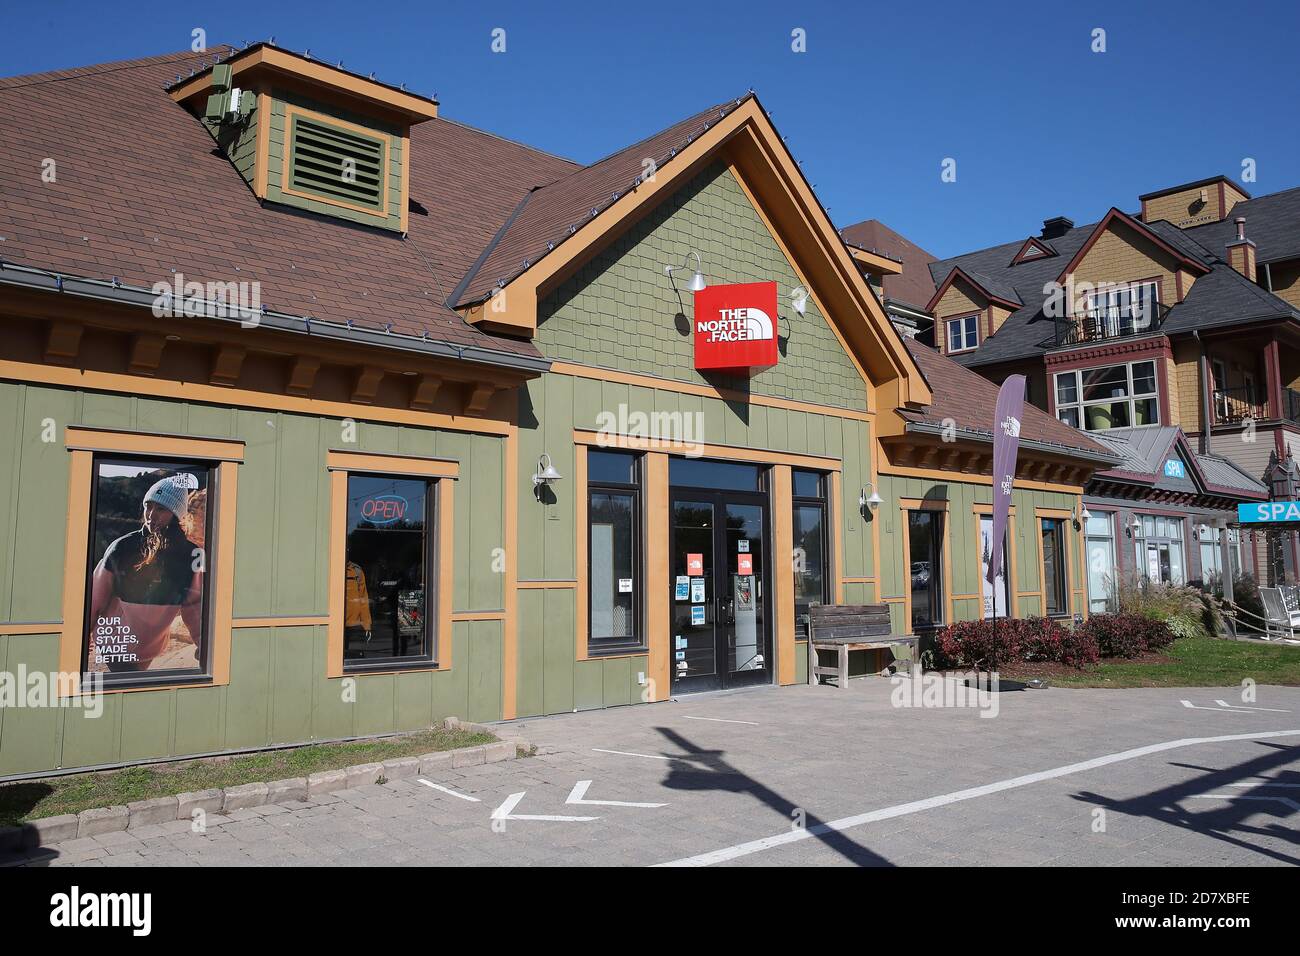 17th of October 2020 - Collinwood Ontario Canada. Blue Mountain Village -  The North Face front entrance. Luke Durda/Alamy Stock Photo - Alamy